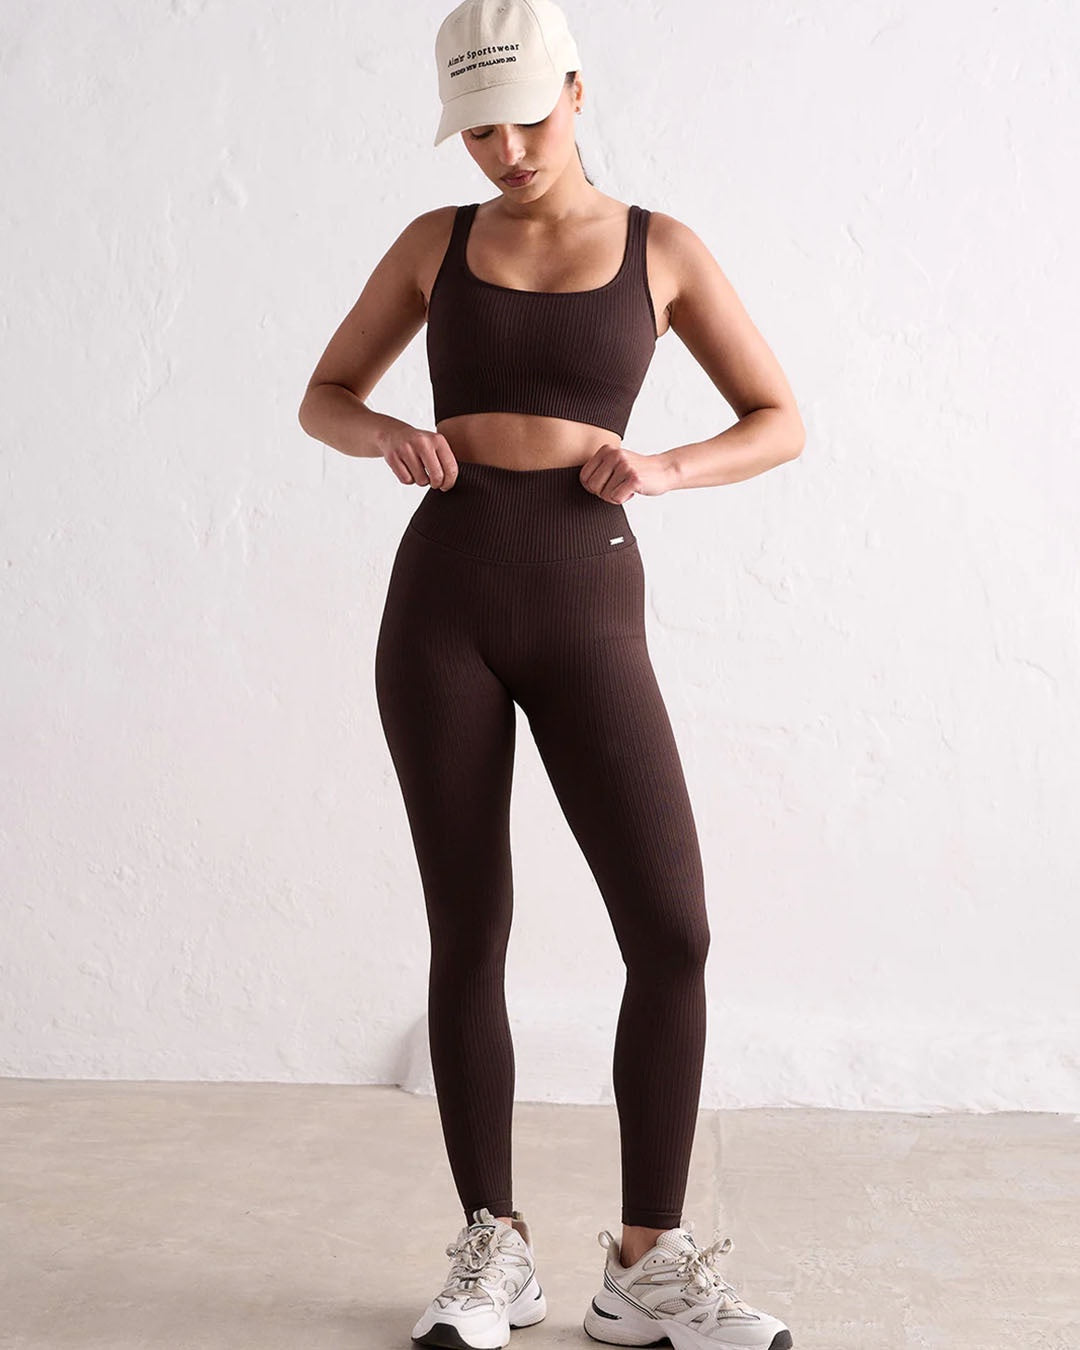 Cacao Ribbed Seamless Tights Leggings by Aim'n - Prae Store